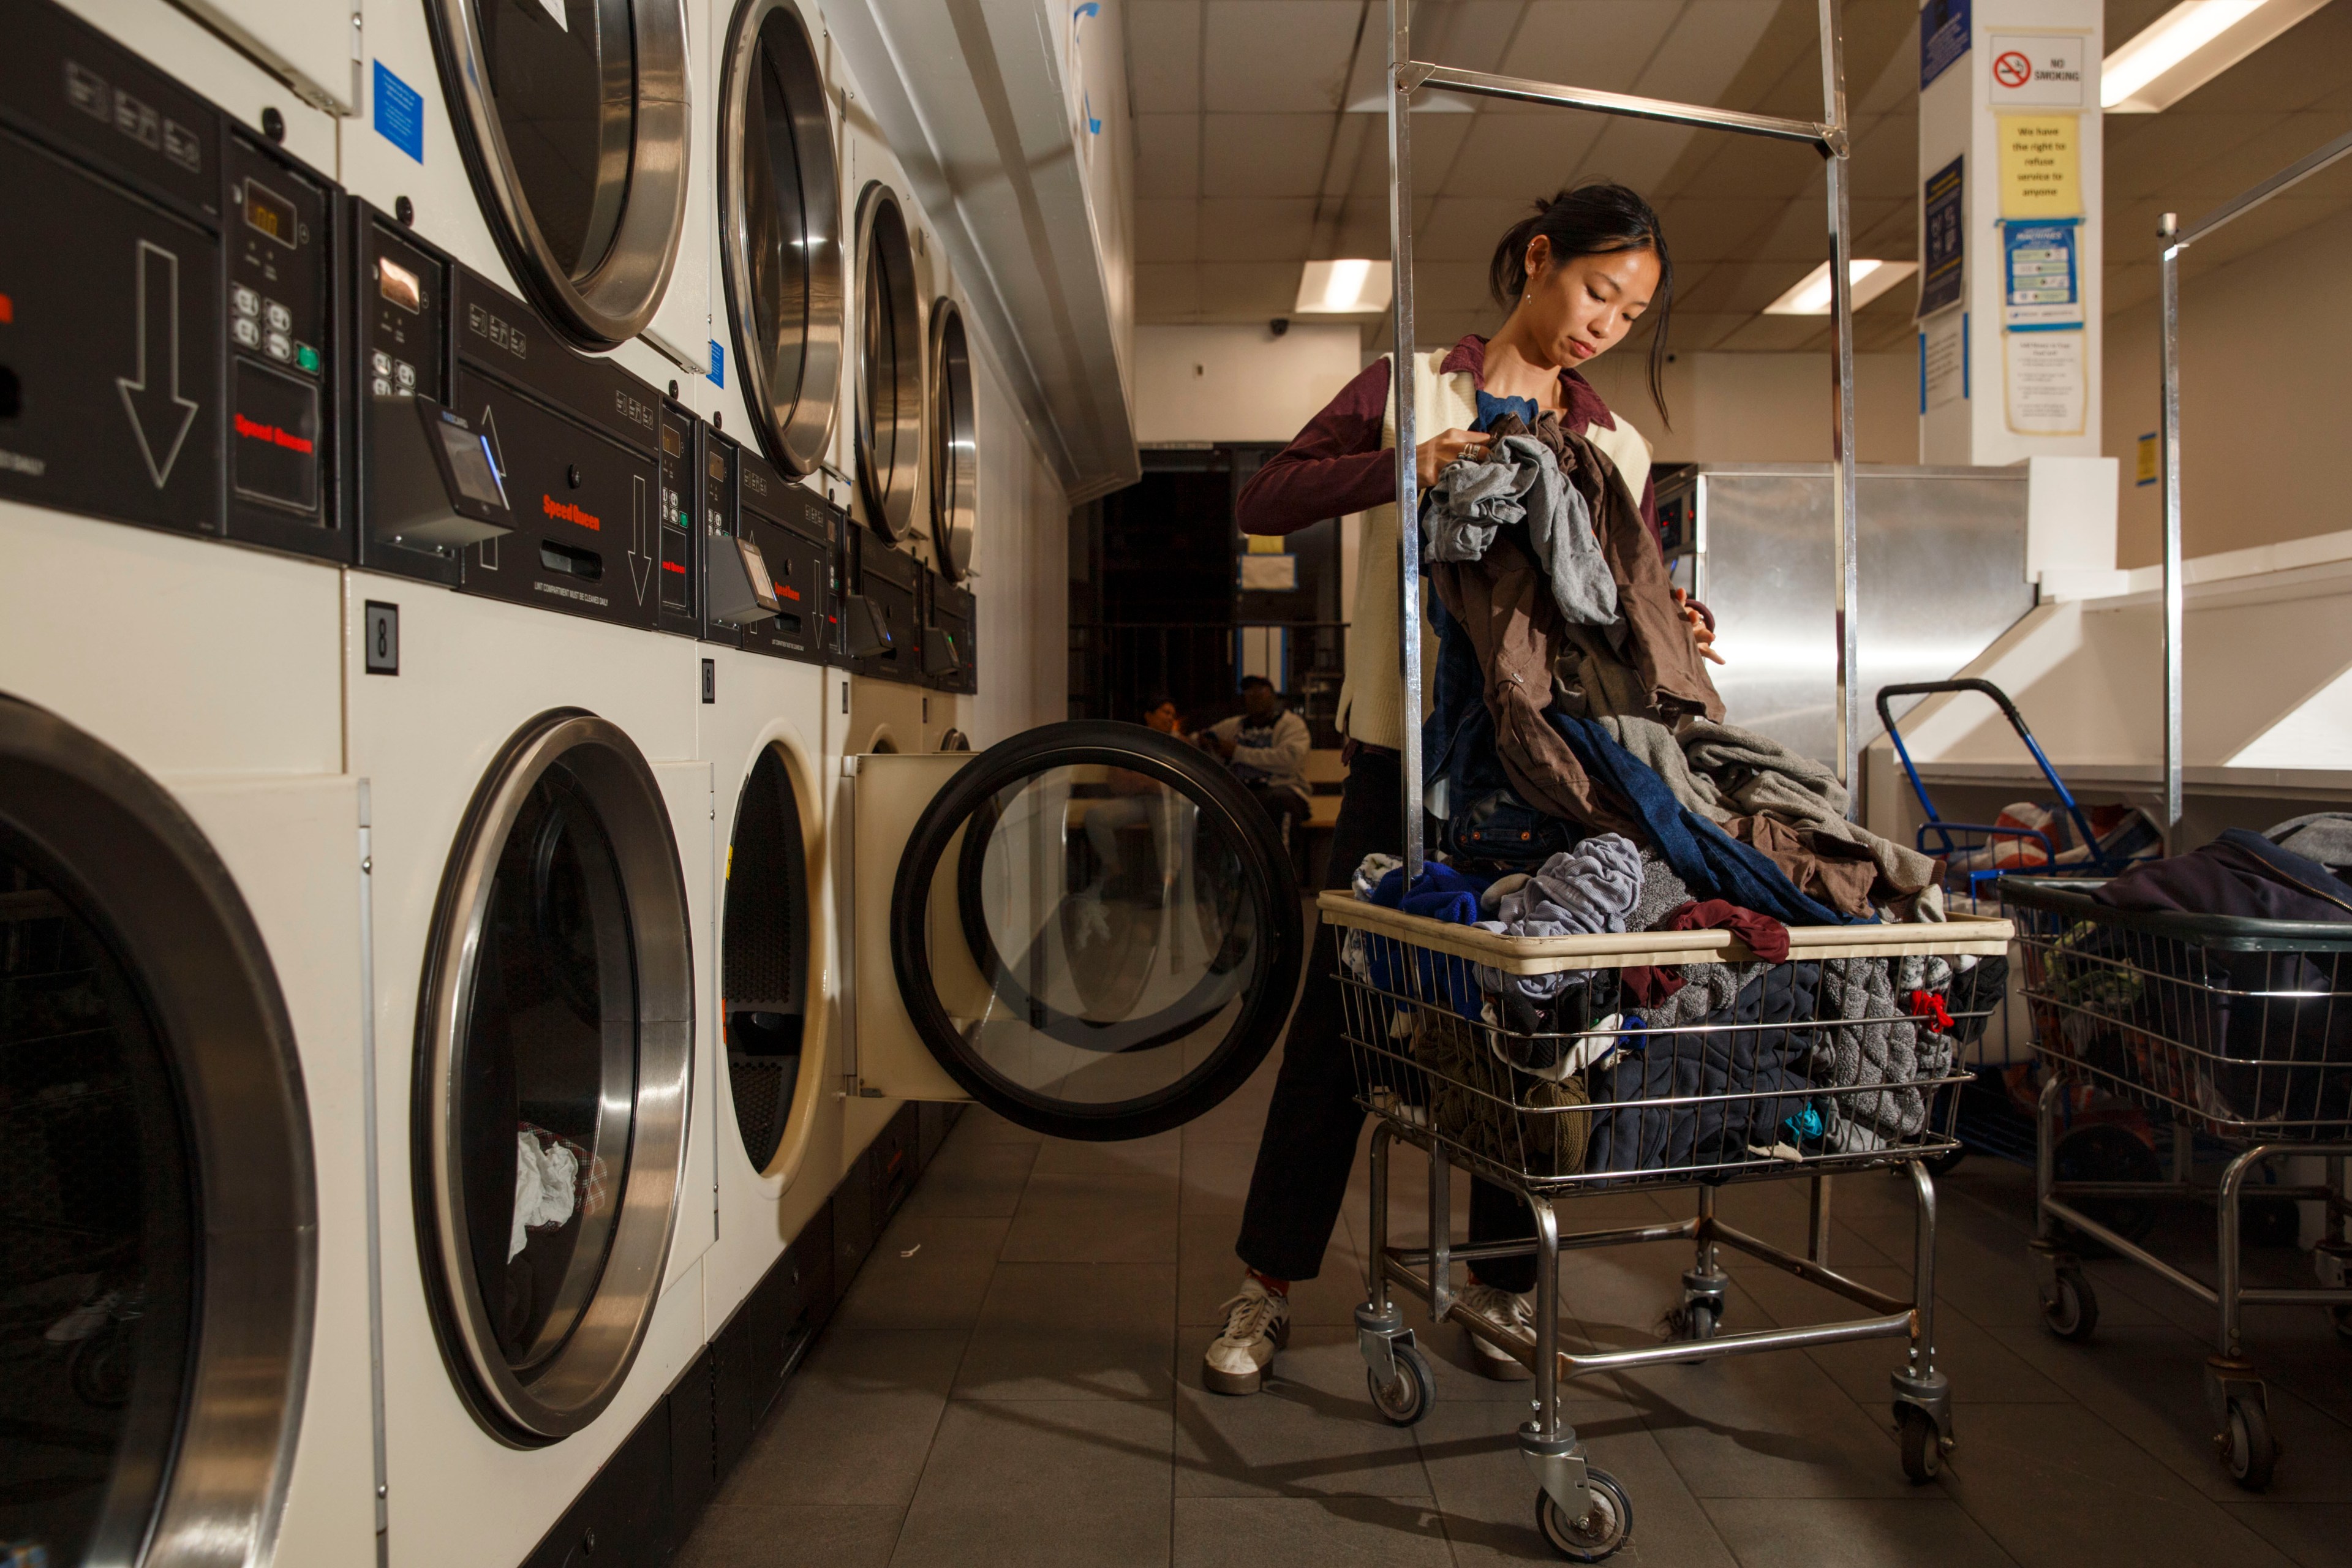 San Francisco’s Laundry Crisis: The Rising Cost of Clean Clothes